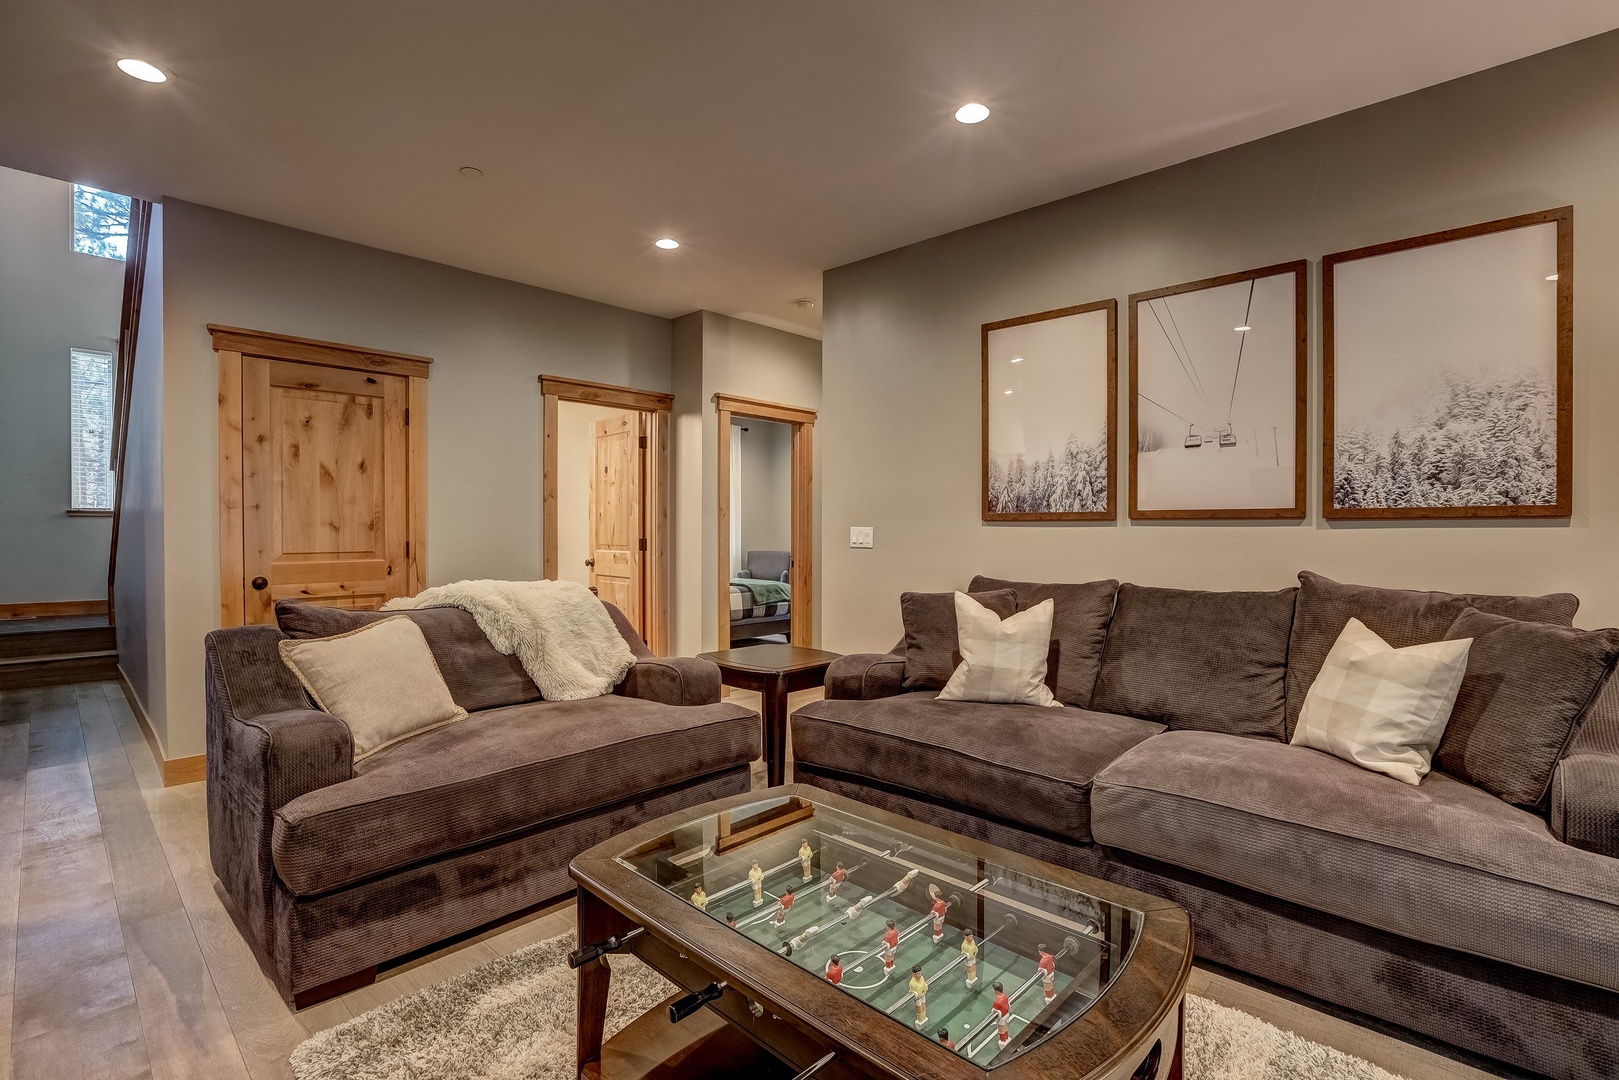 Family room with foosball table and arcade game